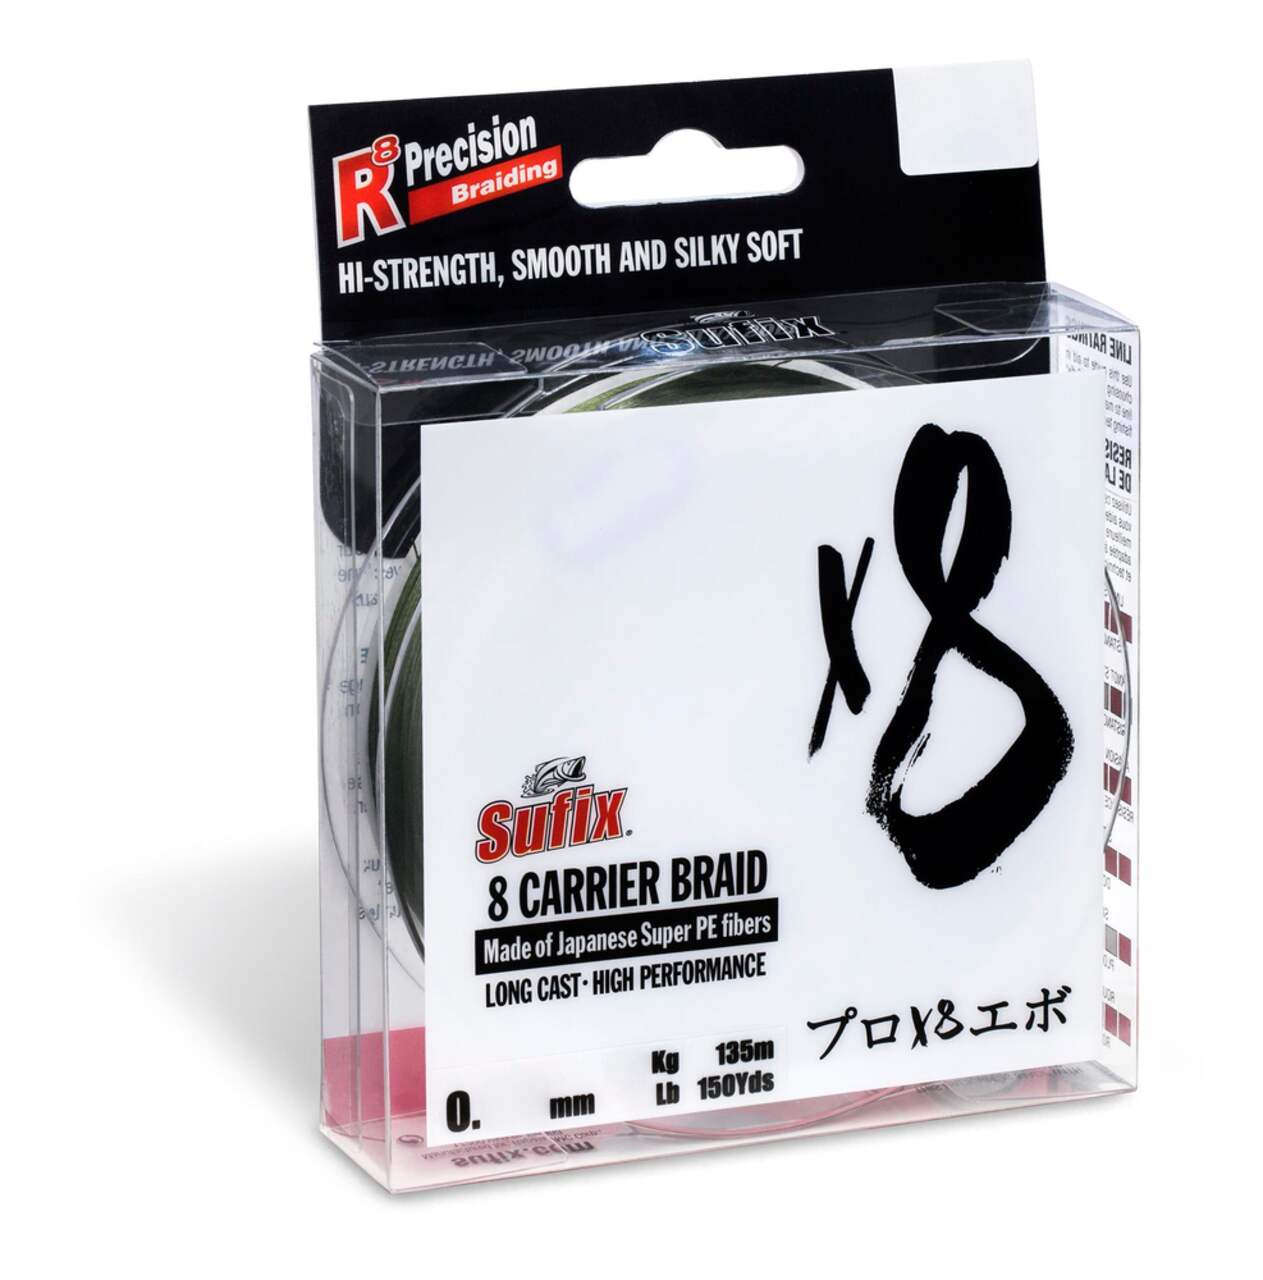 https://media-www.canadiantire.ca/product/playing/fishing/fishing-accessories/0774055/sufix-x8-carrier-braid-150-yd-15lb-green-932f9ada-f9df-4950-bb53-89c1bf69f16e.png?imdensity=1&imwidth=1244&impolicy=mZoom